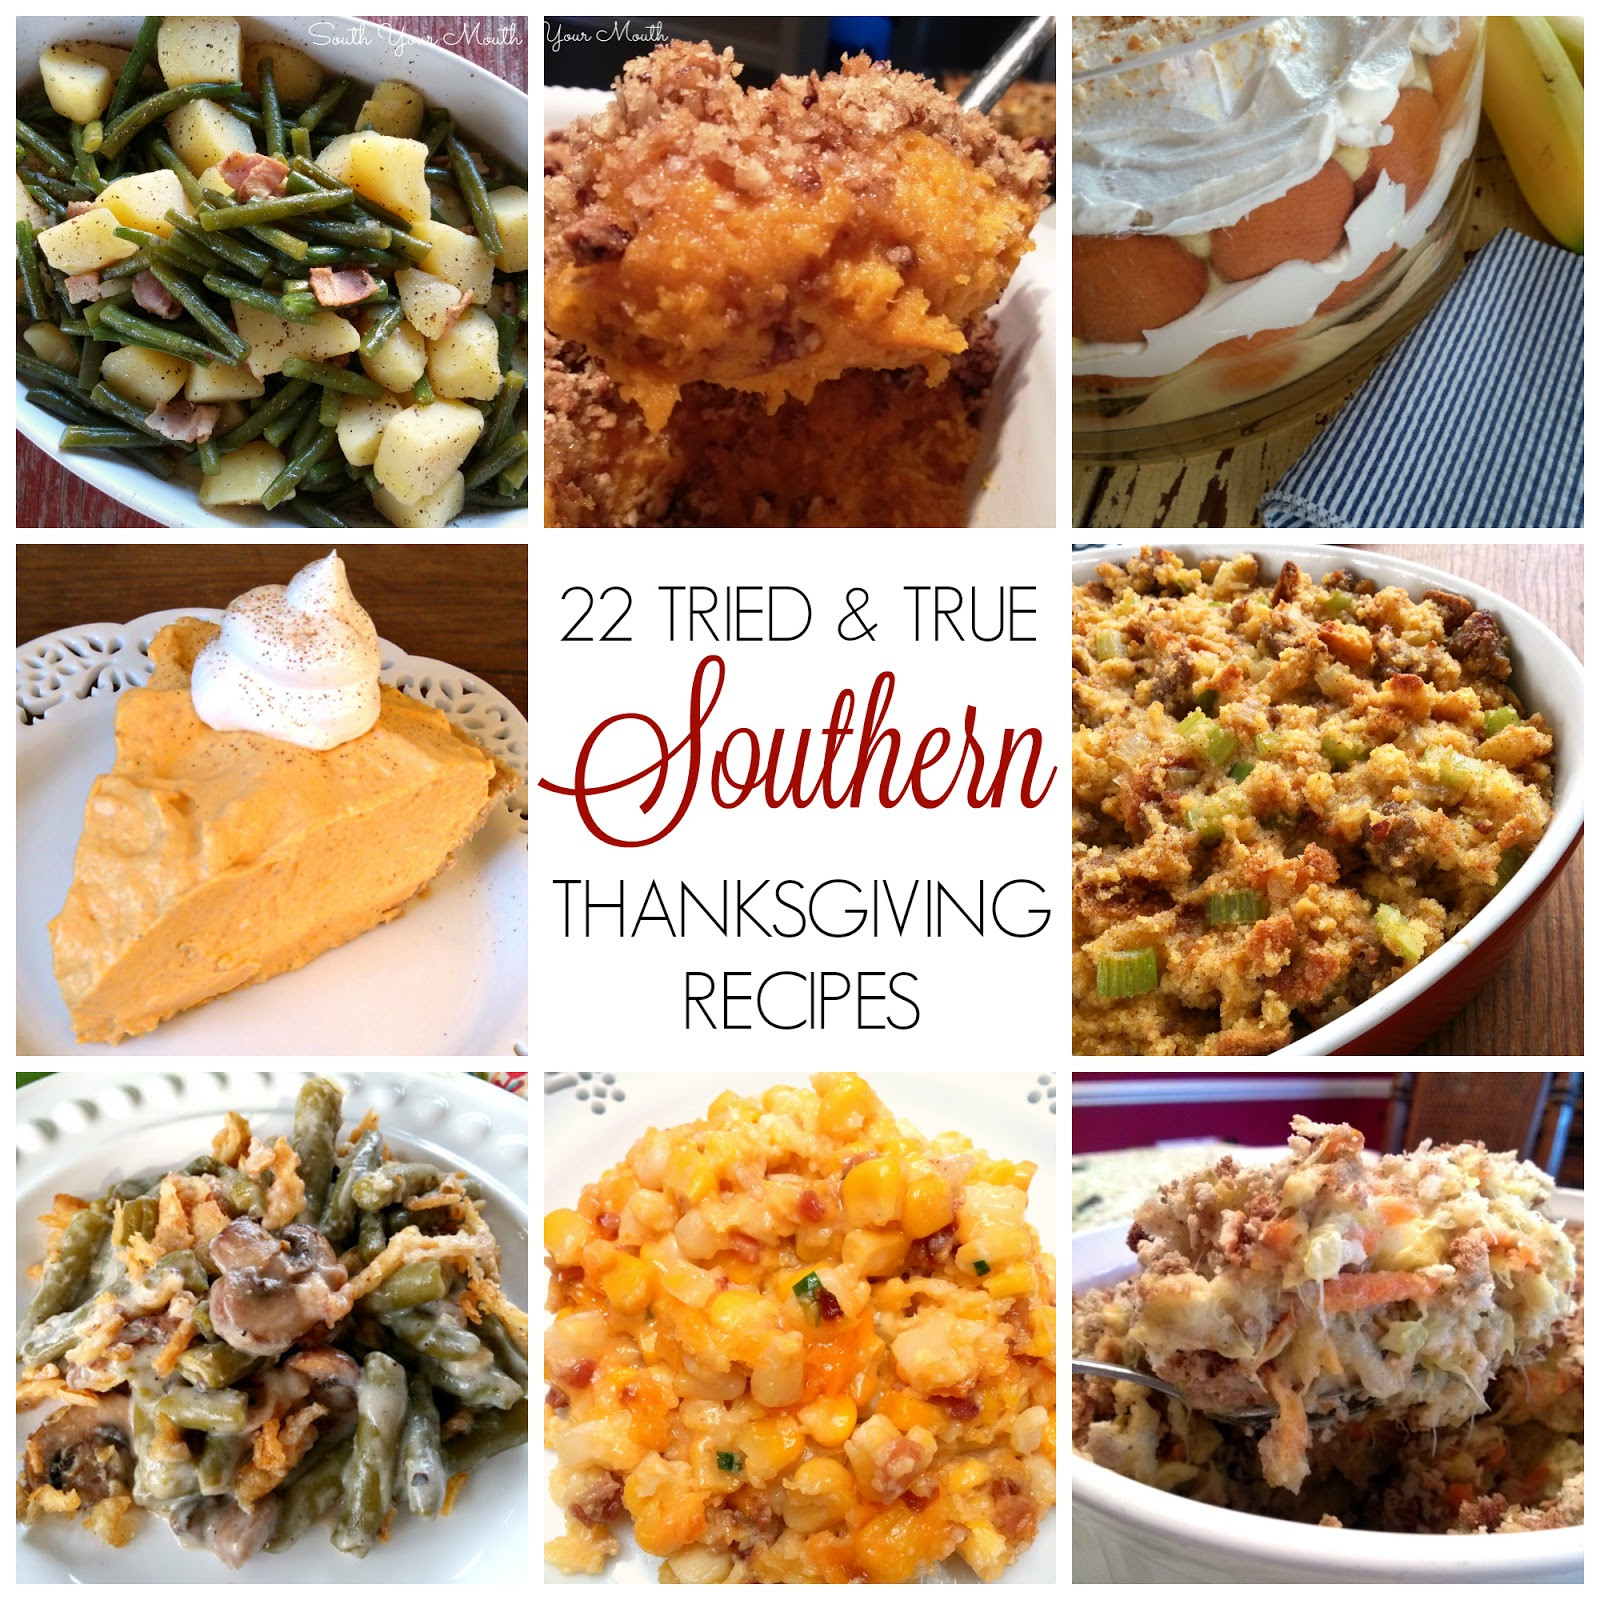 Thanksgiving Dinner Menu Ideas
 South Your Mouth Southern Thanksgiving Recipes